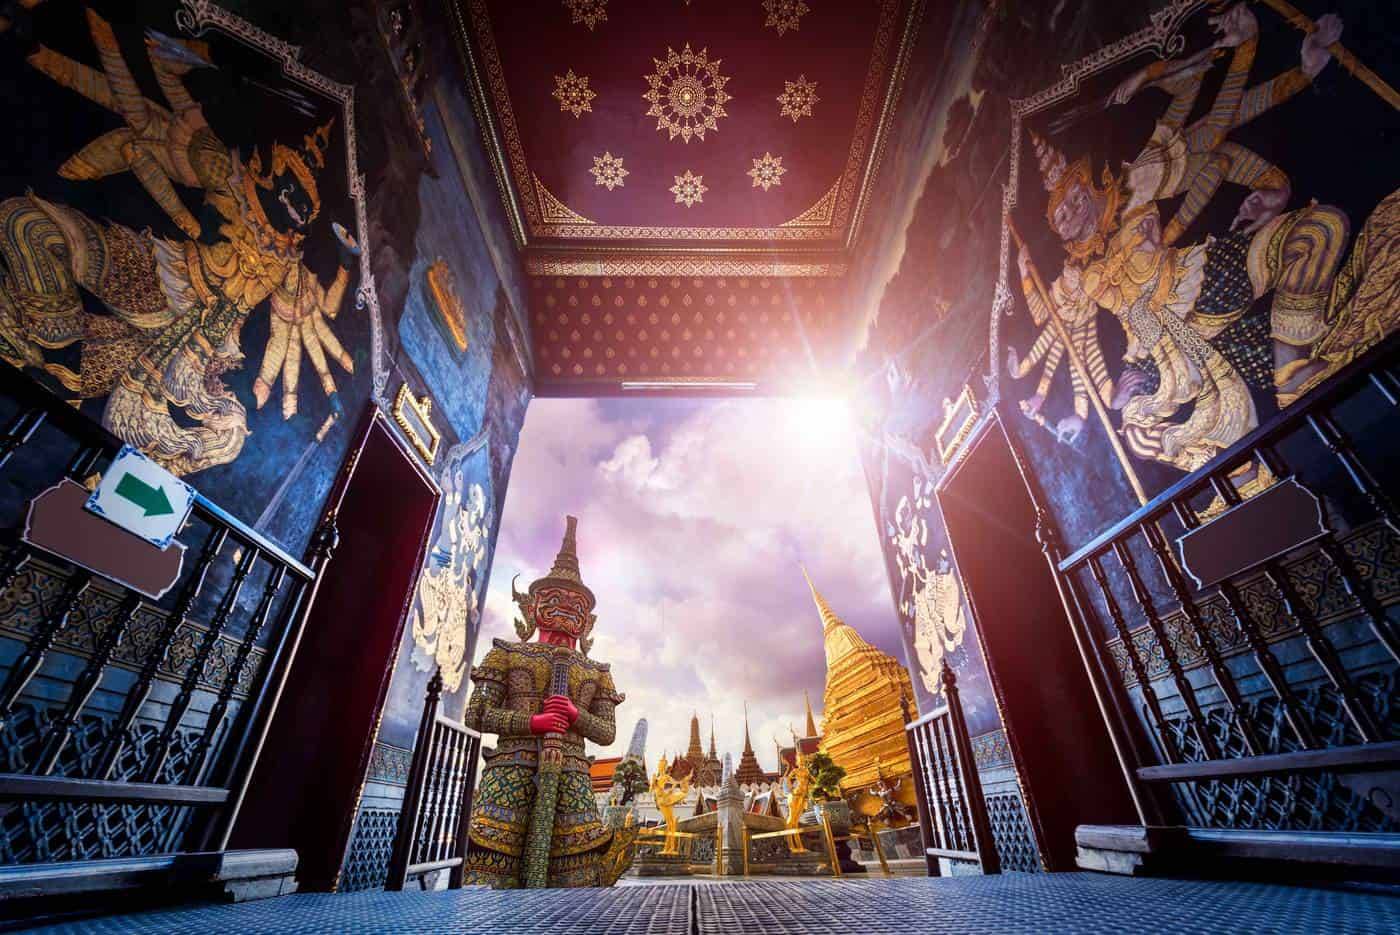 THE MOST BEAUTIFUL TEMPLES IN BANGKOK